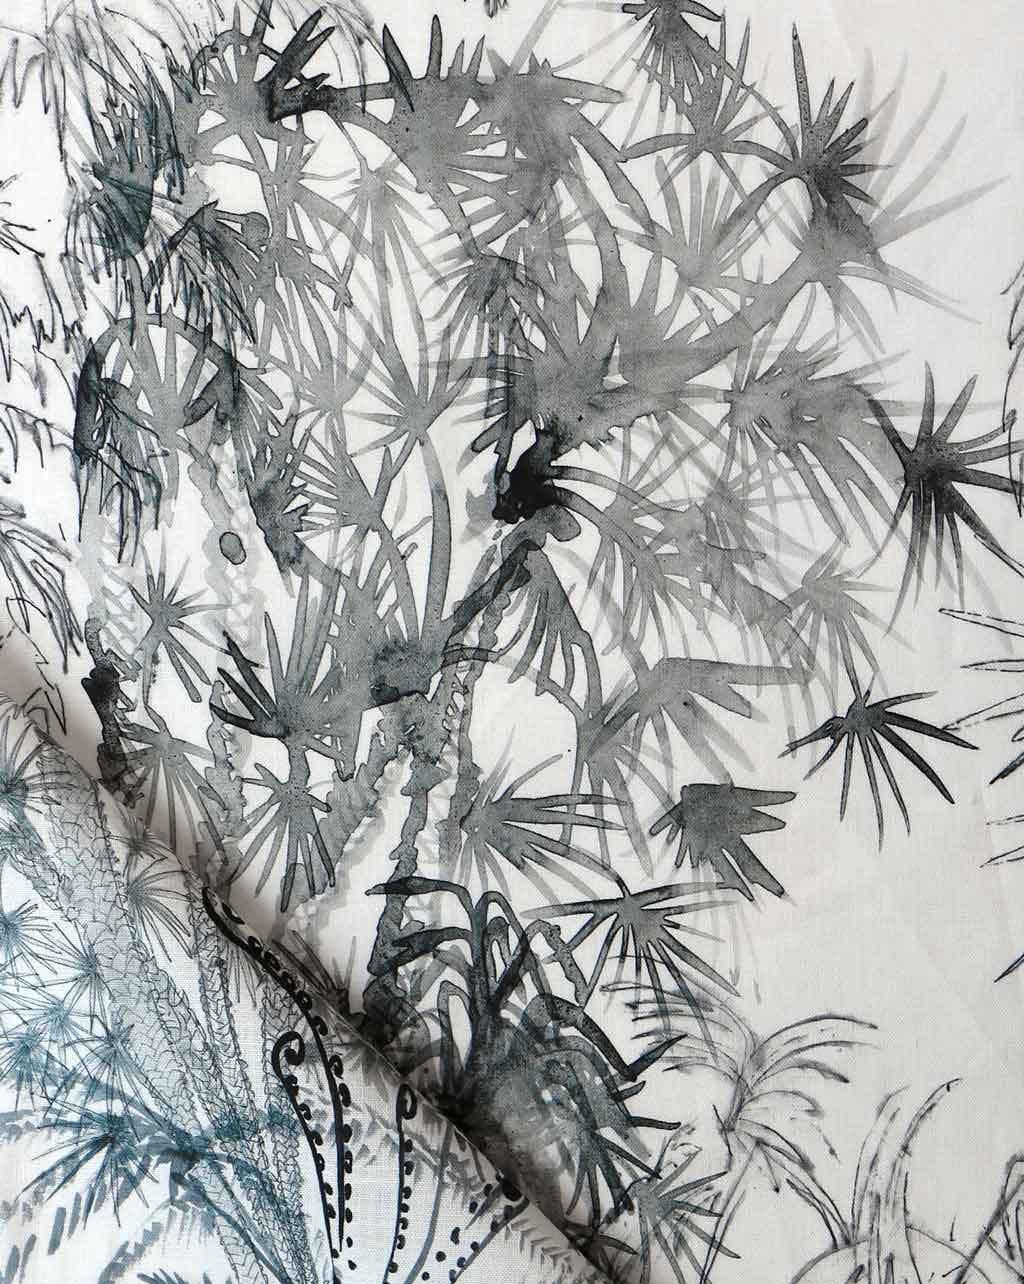 A close up of a black and white painting of a palm tree from the Domenica Fabric Notte Collection